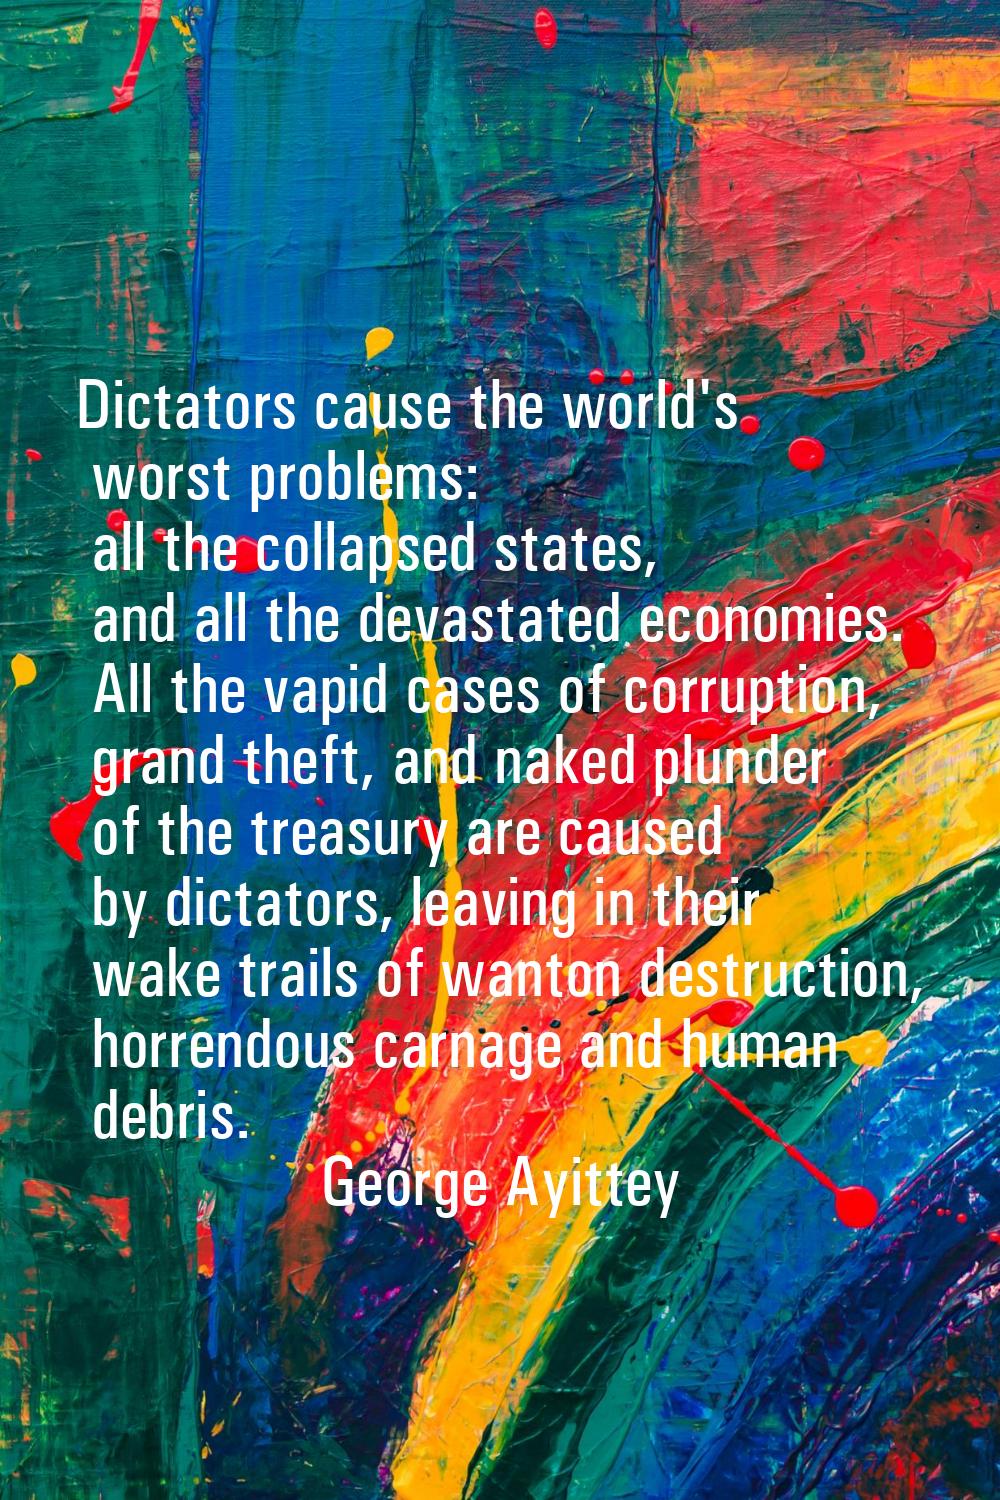 Dictators cause the world's worst problems: all the collapsed states, and all the devastated econom